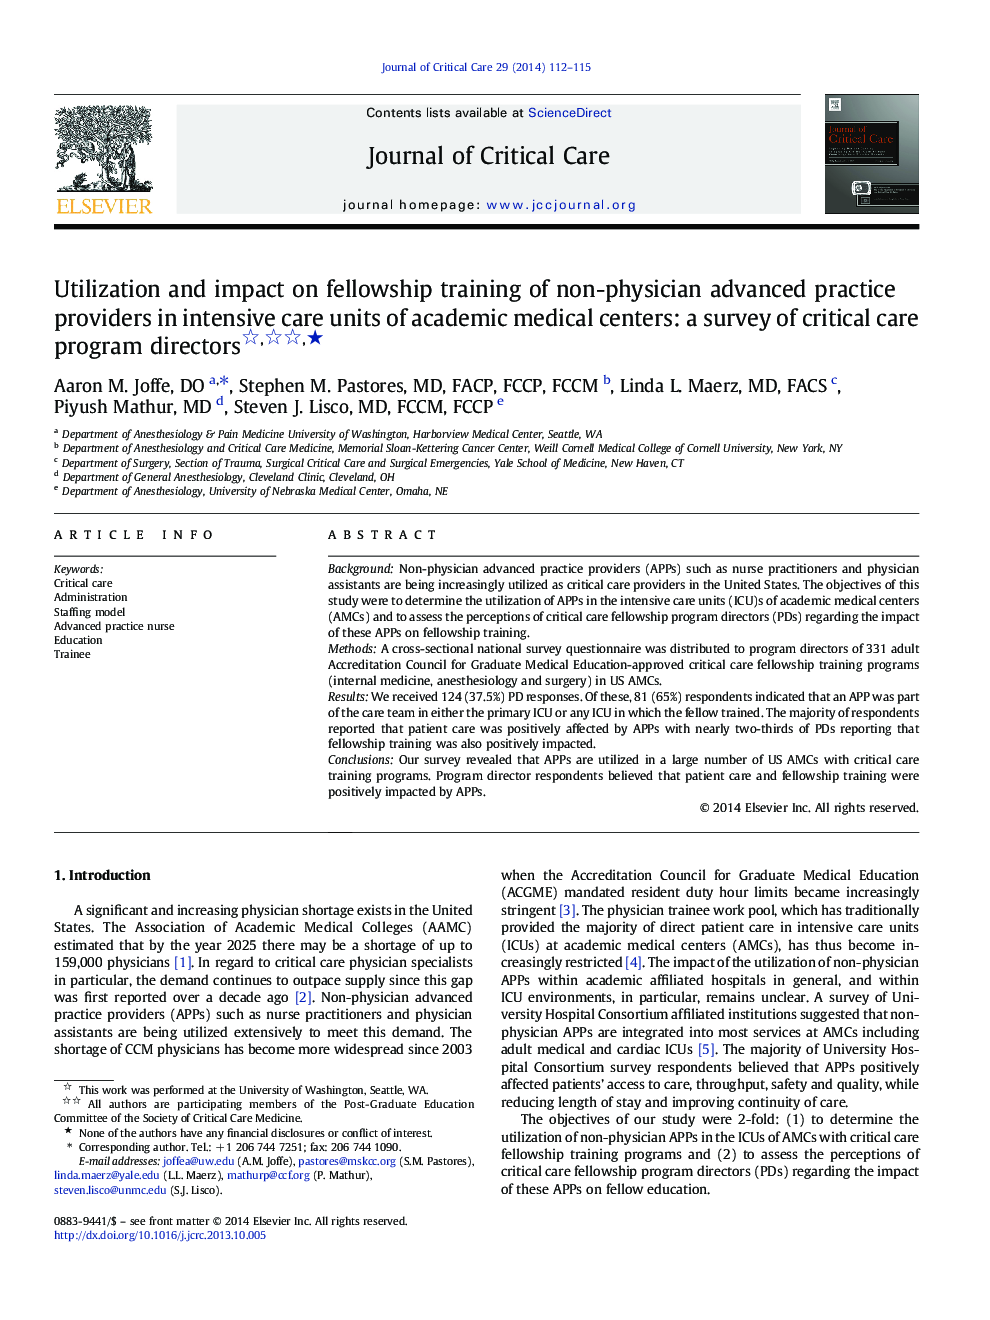 Utilization and impact on fellowship training of non-physician advanced practice providers in intensive care units of academic medical centers: a survey of critical care program directors ★